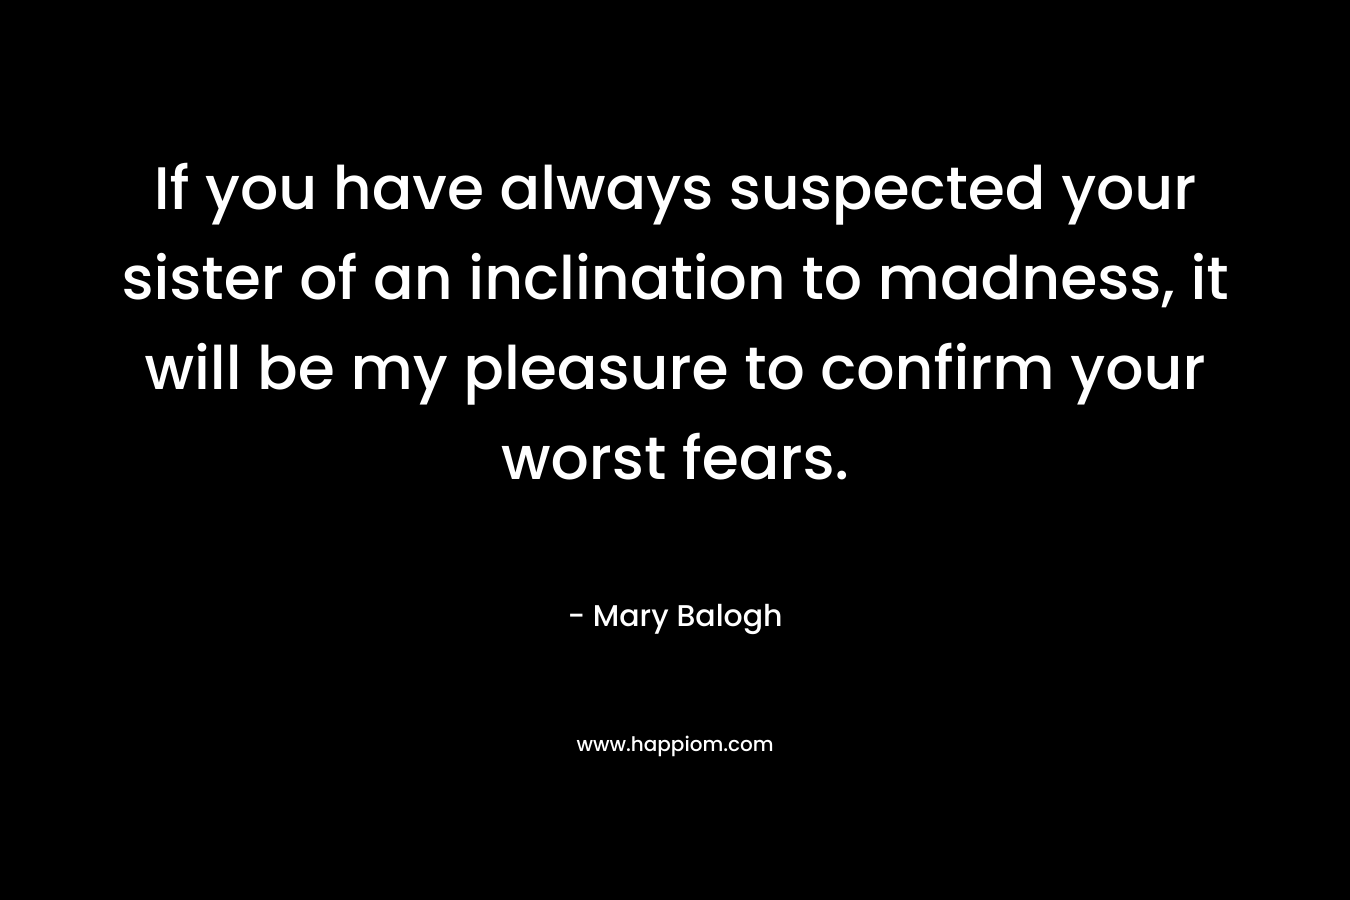 If you have always suspected your sister of an inclination to madness, it will be my pleasure to confirm your worst fears. – Mary Balogh